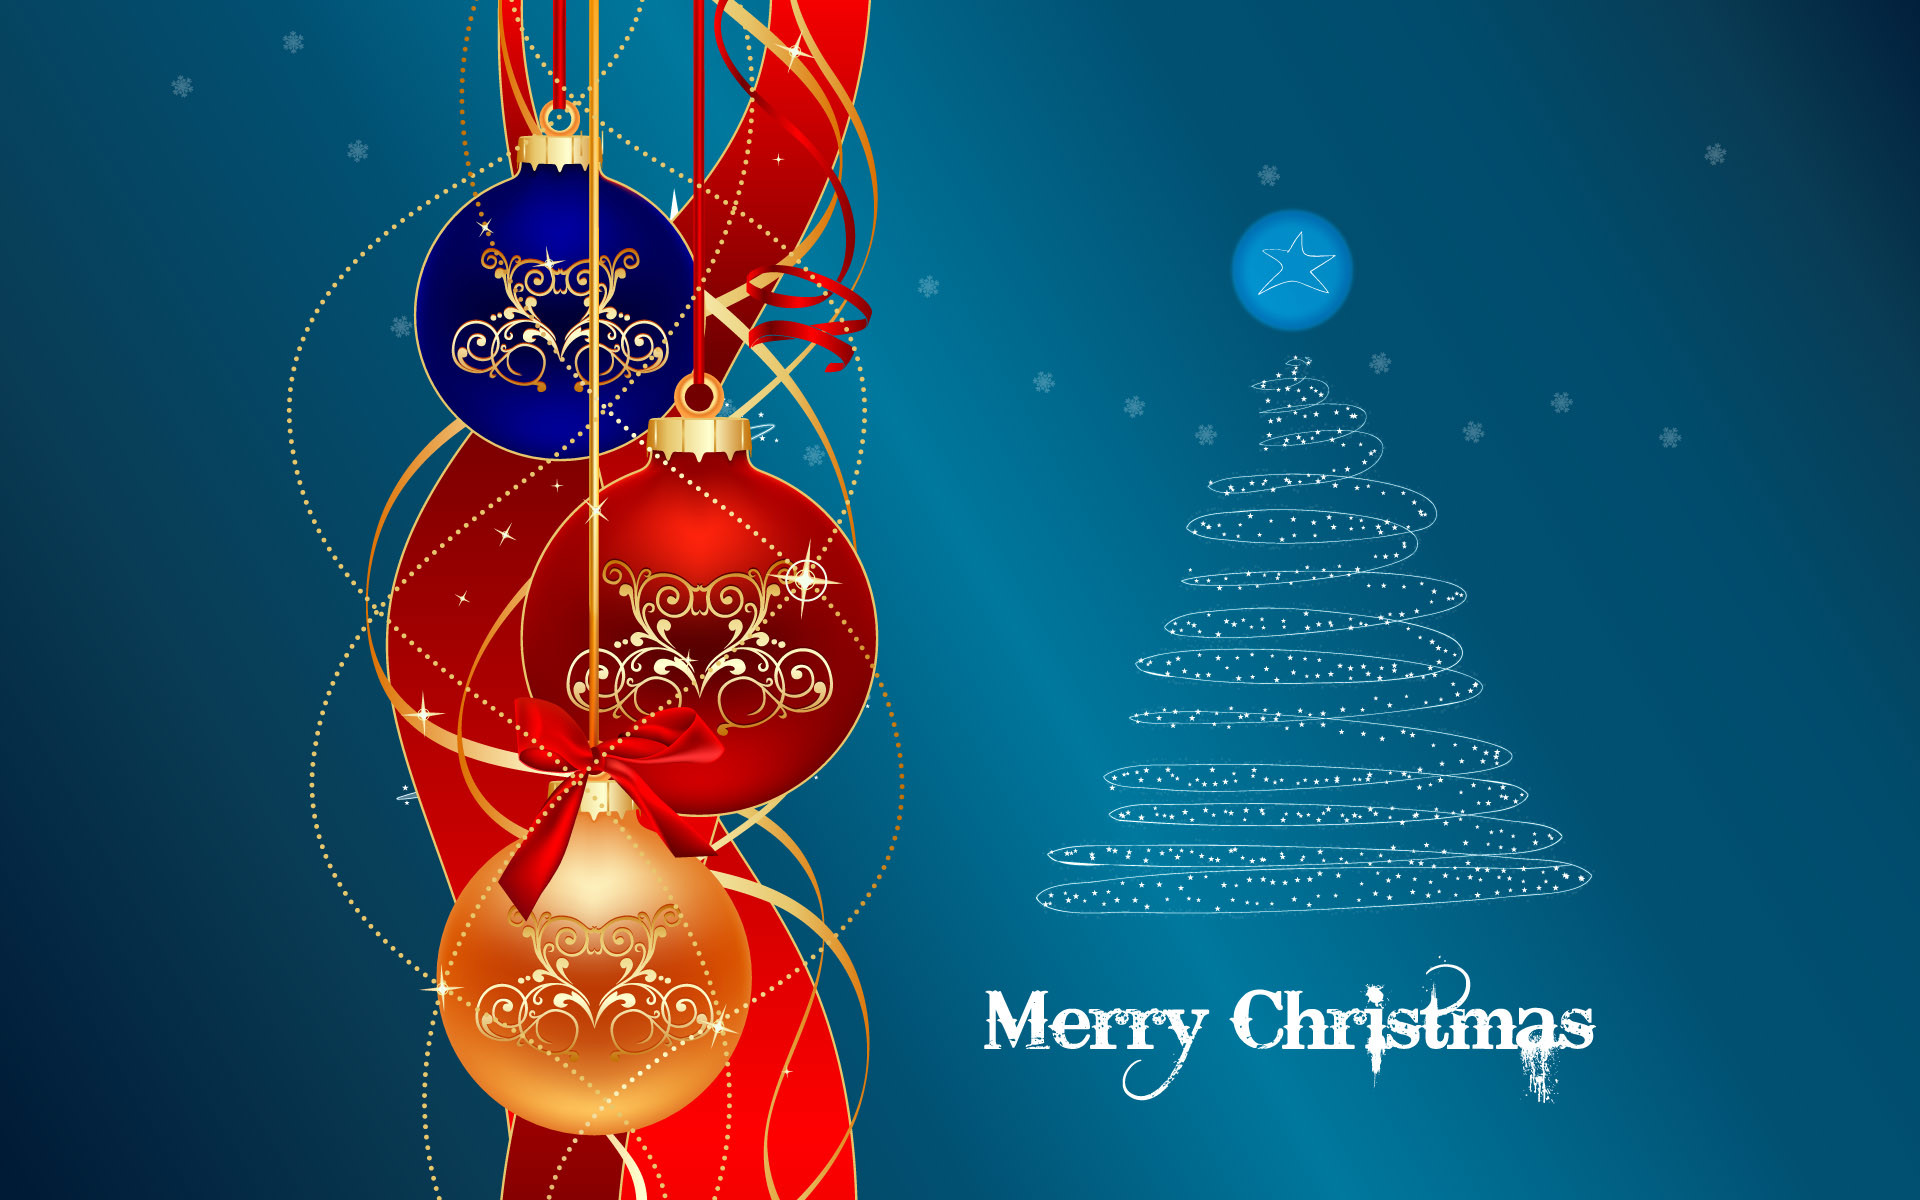 Cute Merry Christmas background Full HD 1080p Wallpapers | PIXHOME